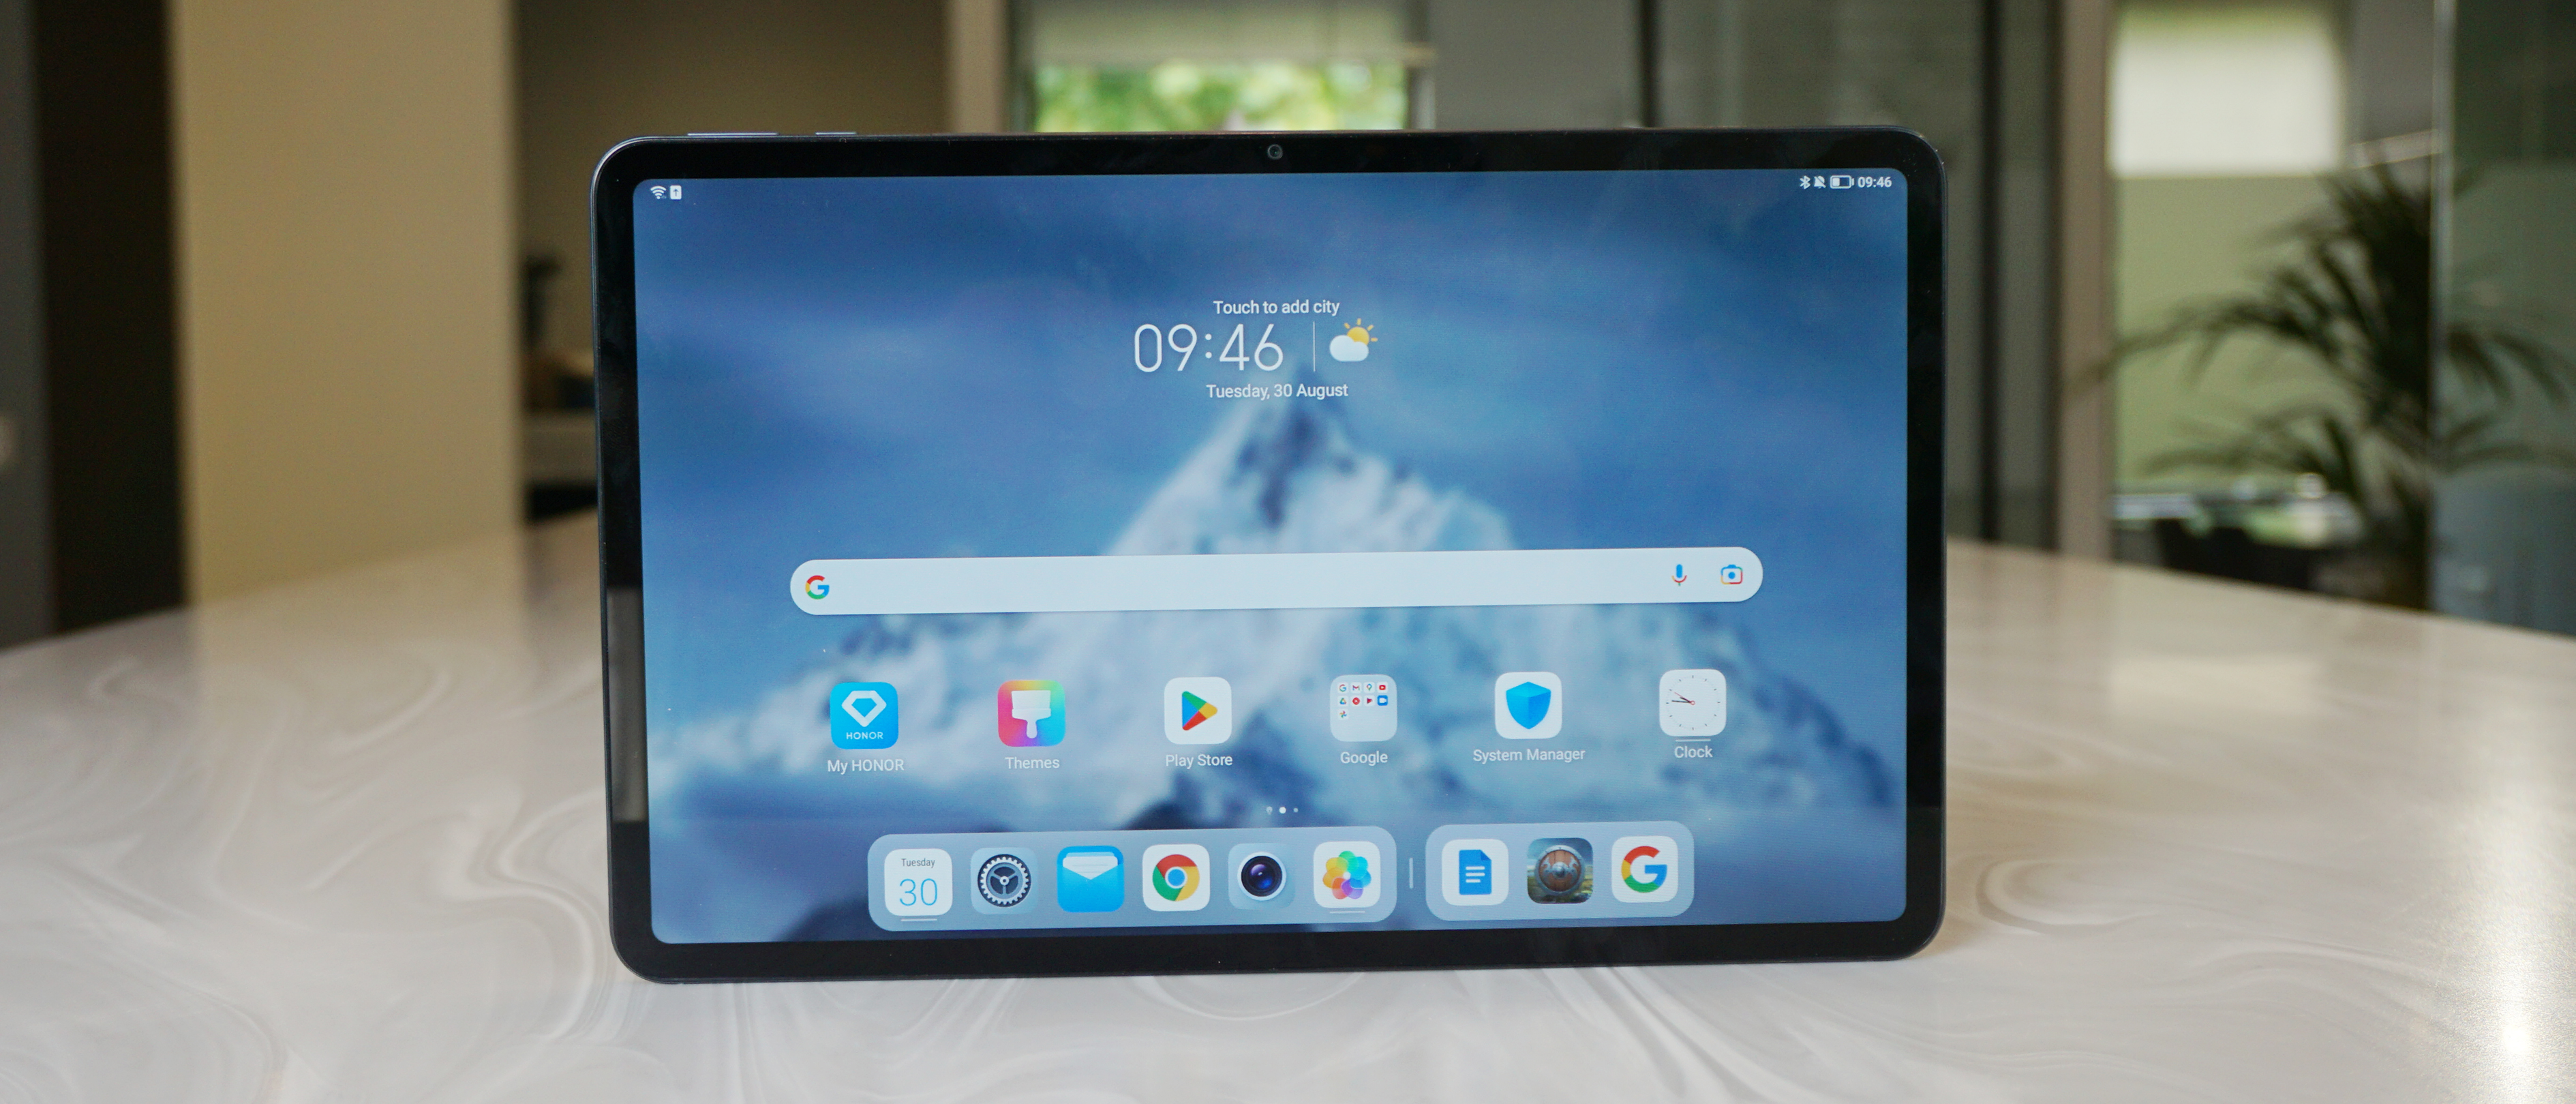 8-Inch Tablet Phone Huawei Honor Tablet Launch September